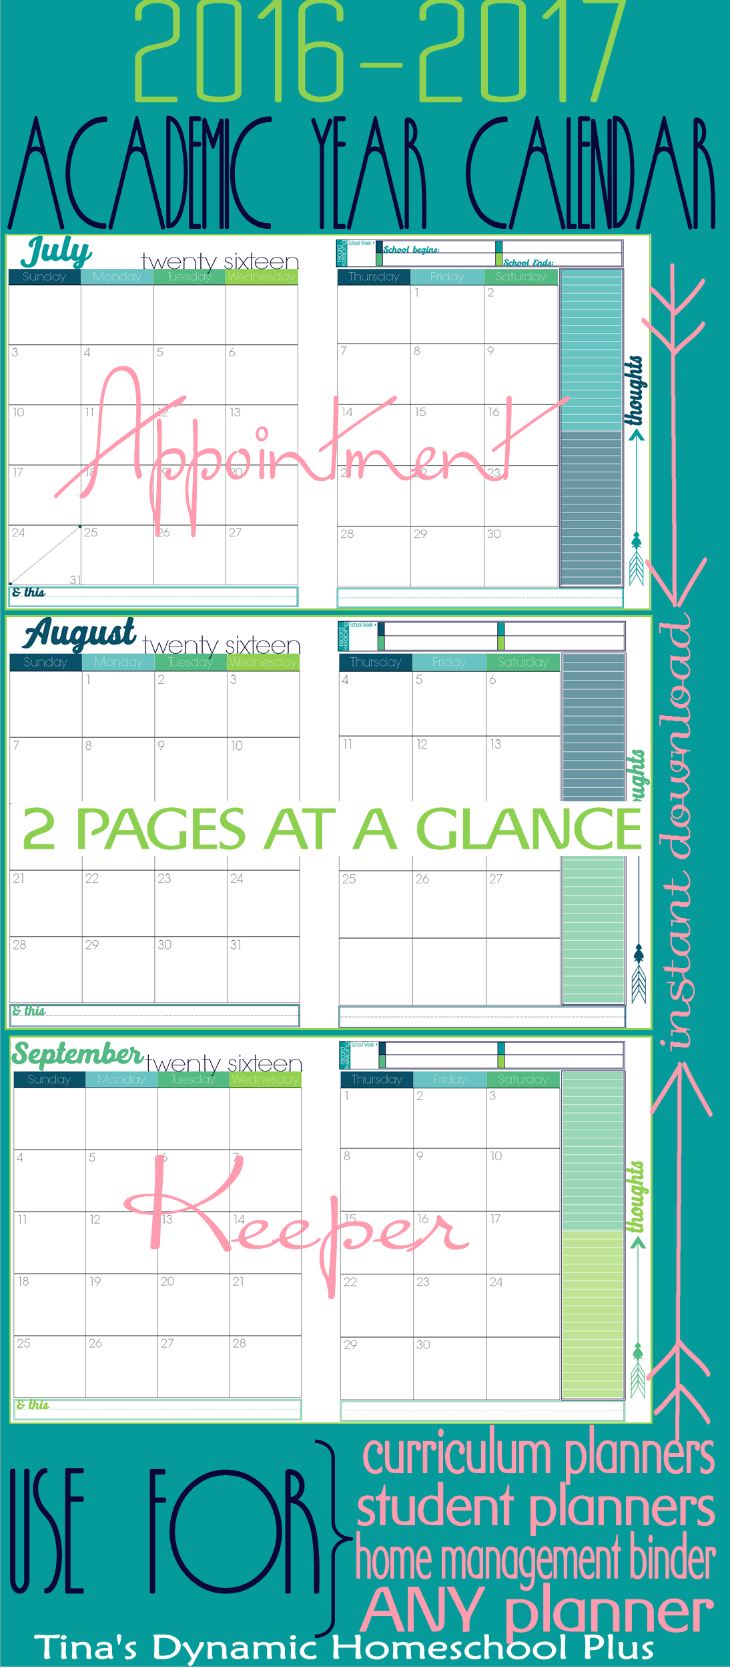 2016 to 2017 Academic Year Turquoise Candy 2 Pages at a Glance @ Tina's Dynamic Homeschool Plus